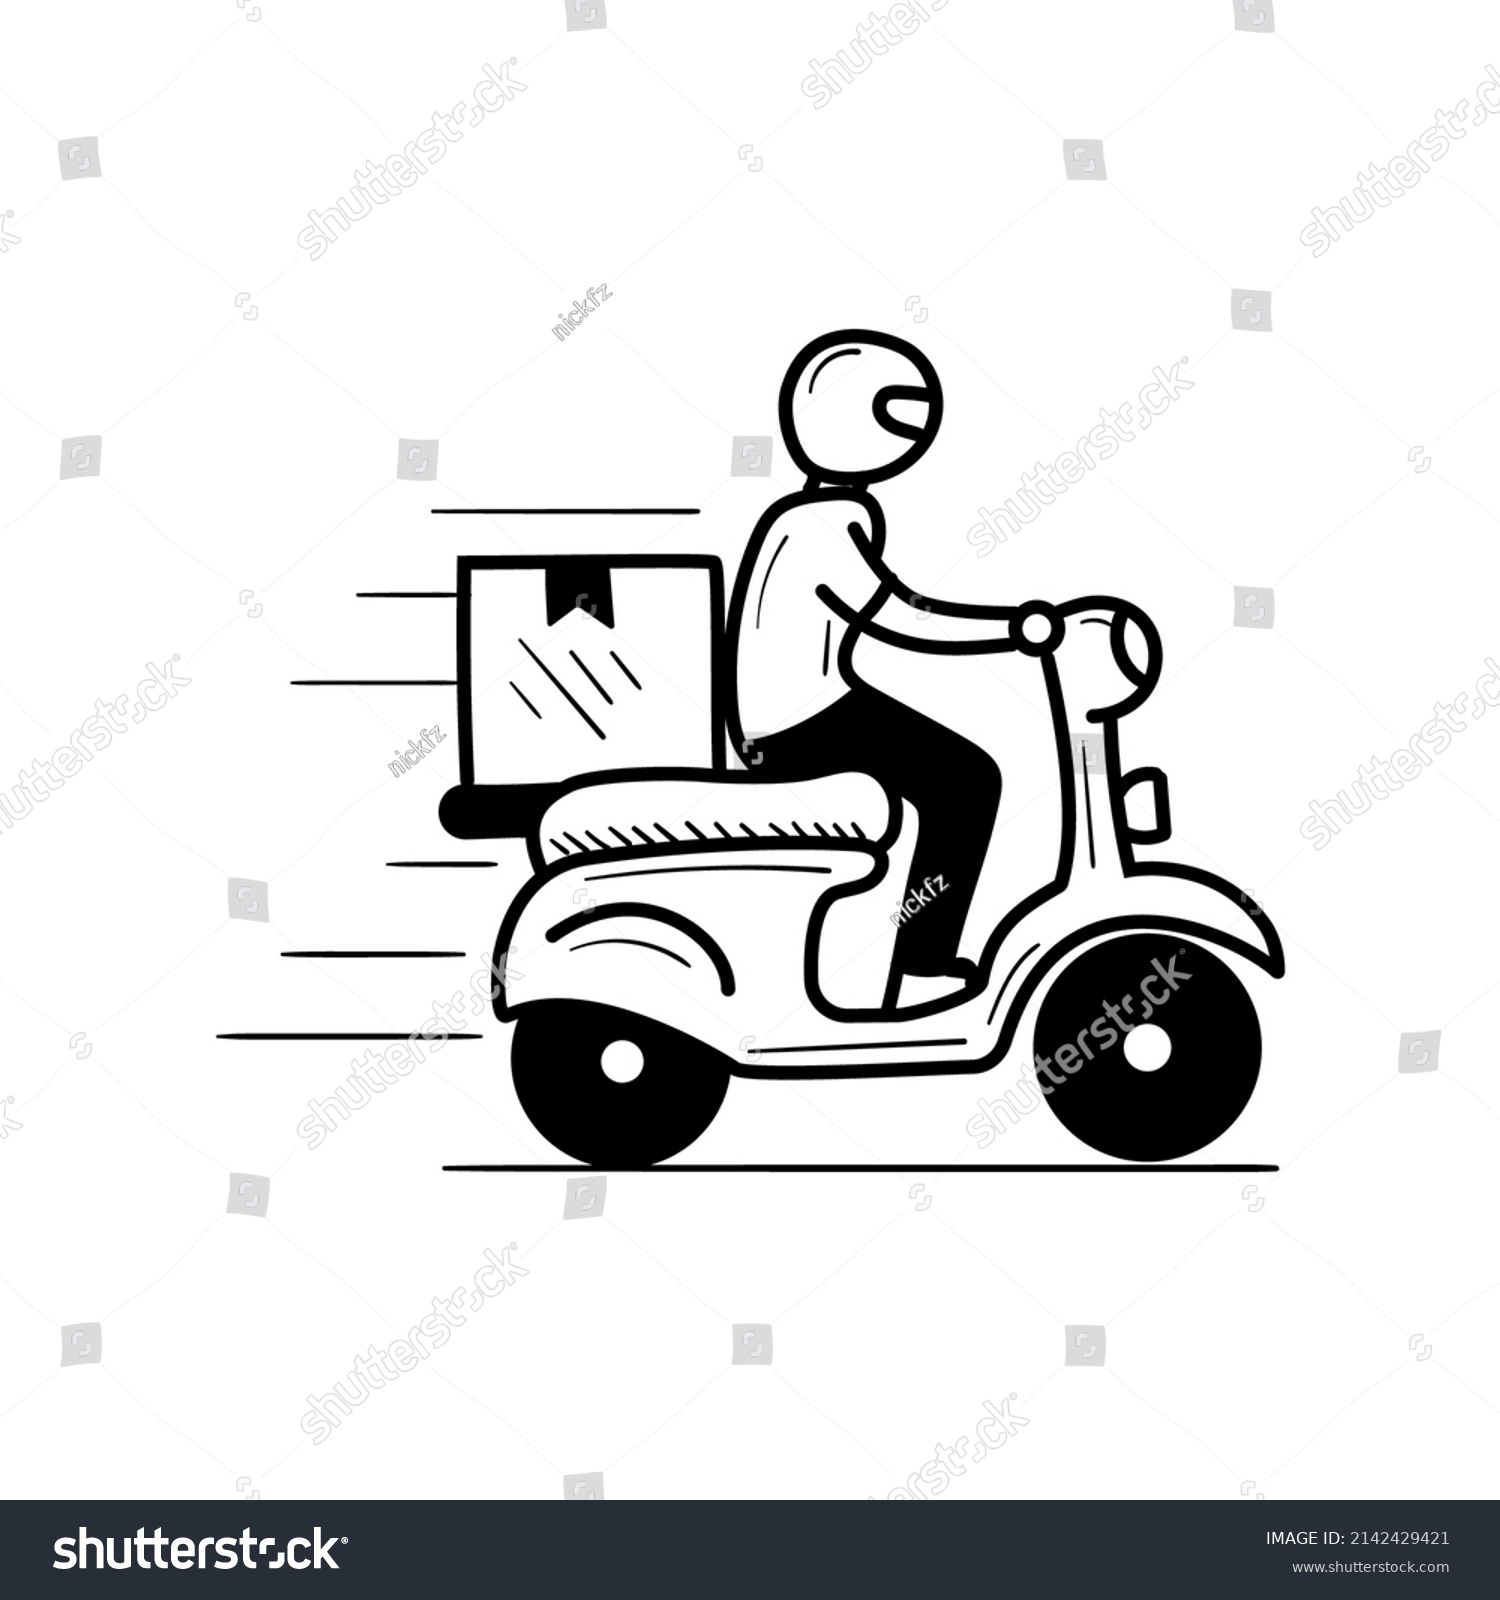 SVG of Delivery guy with motorcycle vector illustration in hand-drawn style isolated on white background svg